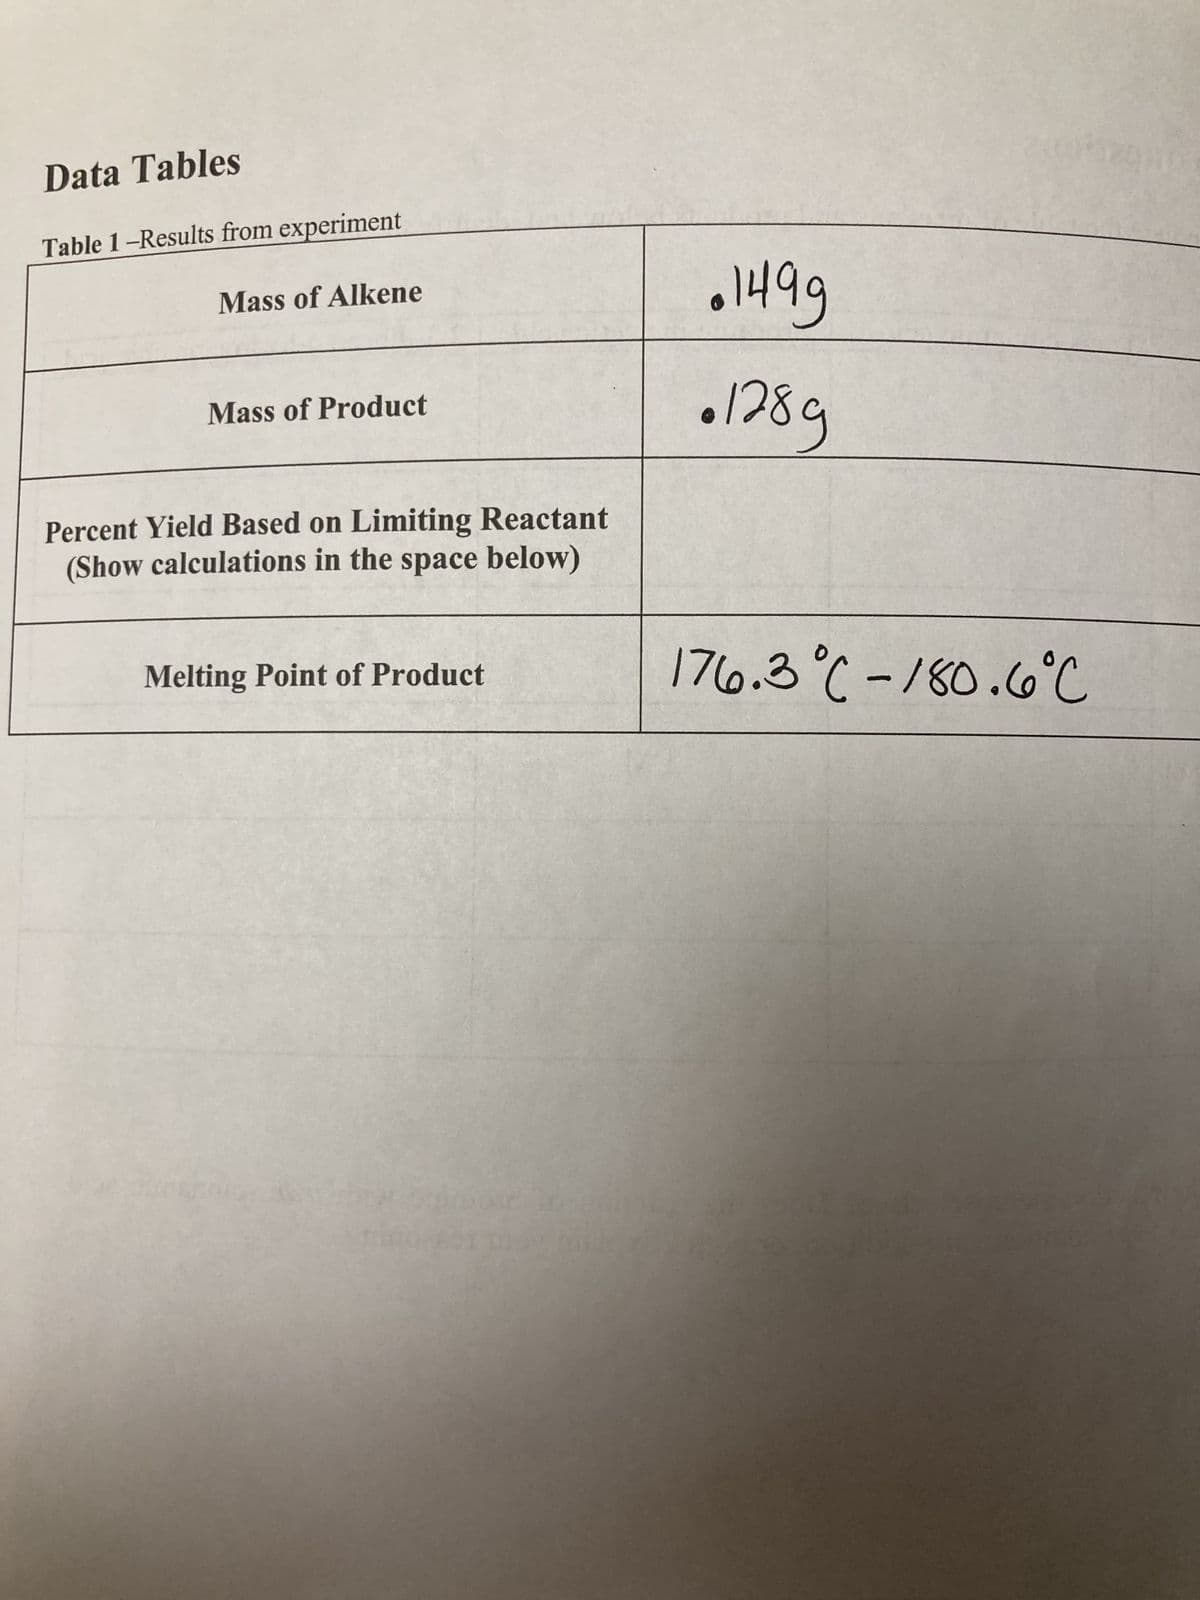 Data Tables
Table 1-Results from experiment
Mass of Alkene
Mass of Product
Percent Yield Based on Limiting Reactant
(Show calculations in the space below)
Melting Point of Product
11499
•1289
176.3 °C -180.6°C